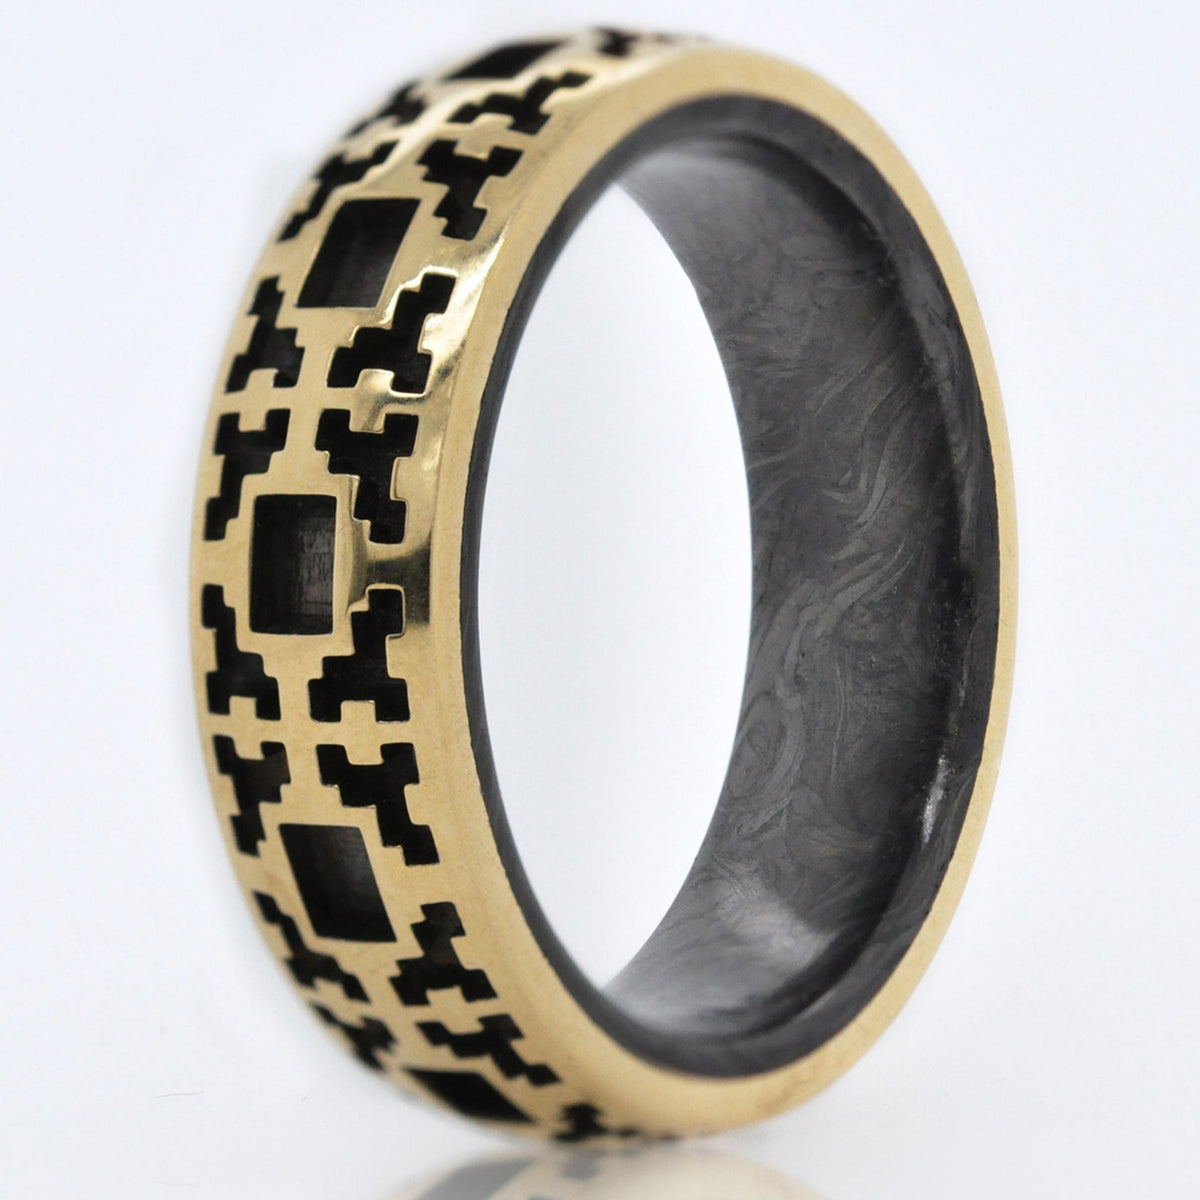 Wedding band featuring a Square Pattern exterior cast in 14K Gold with a Forged Carbon Fiber interior. 